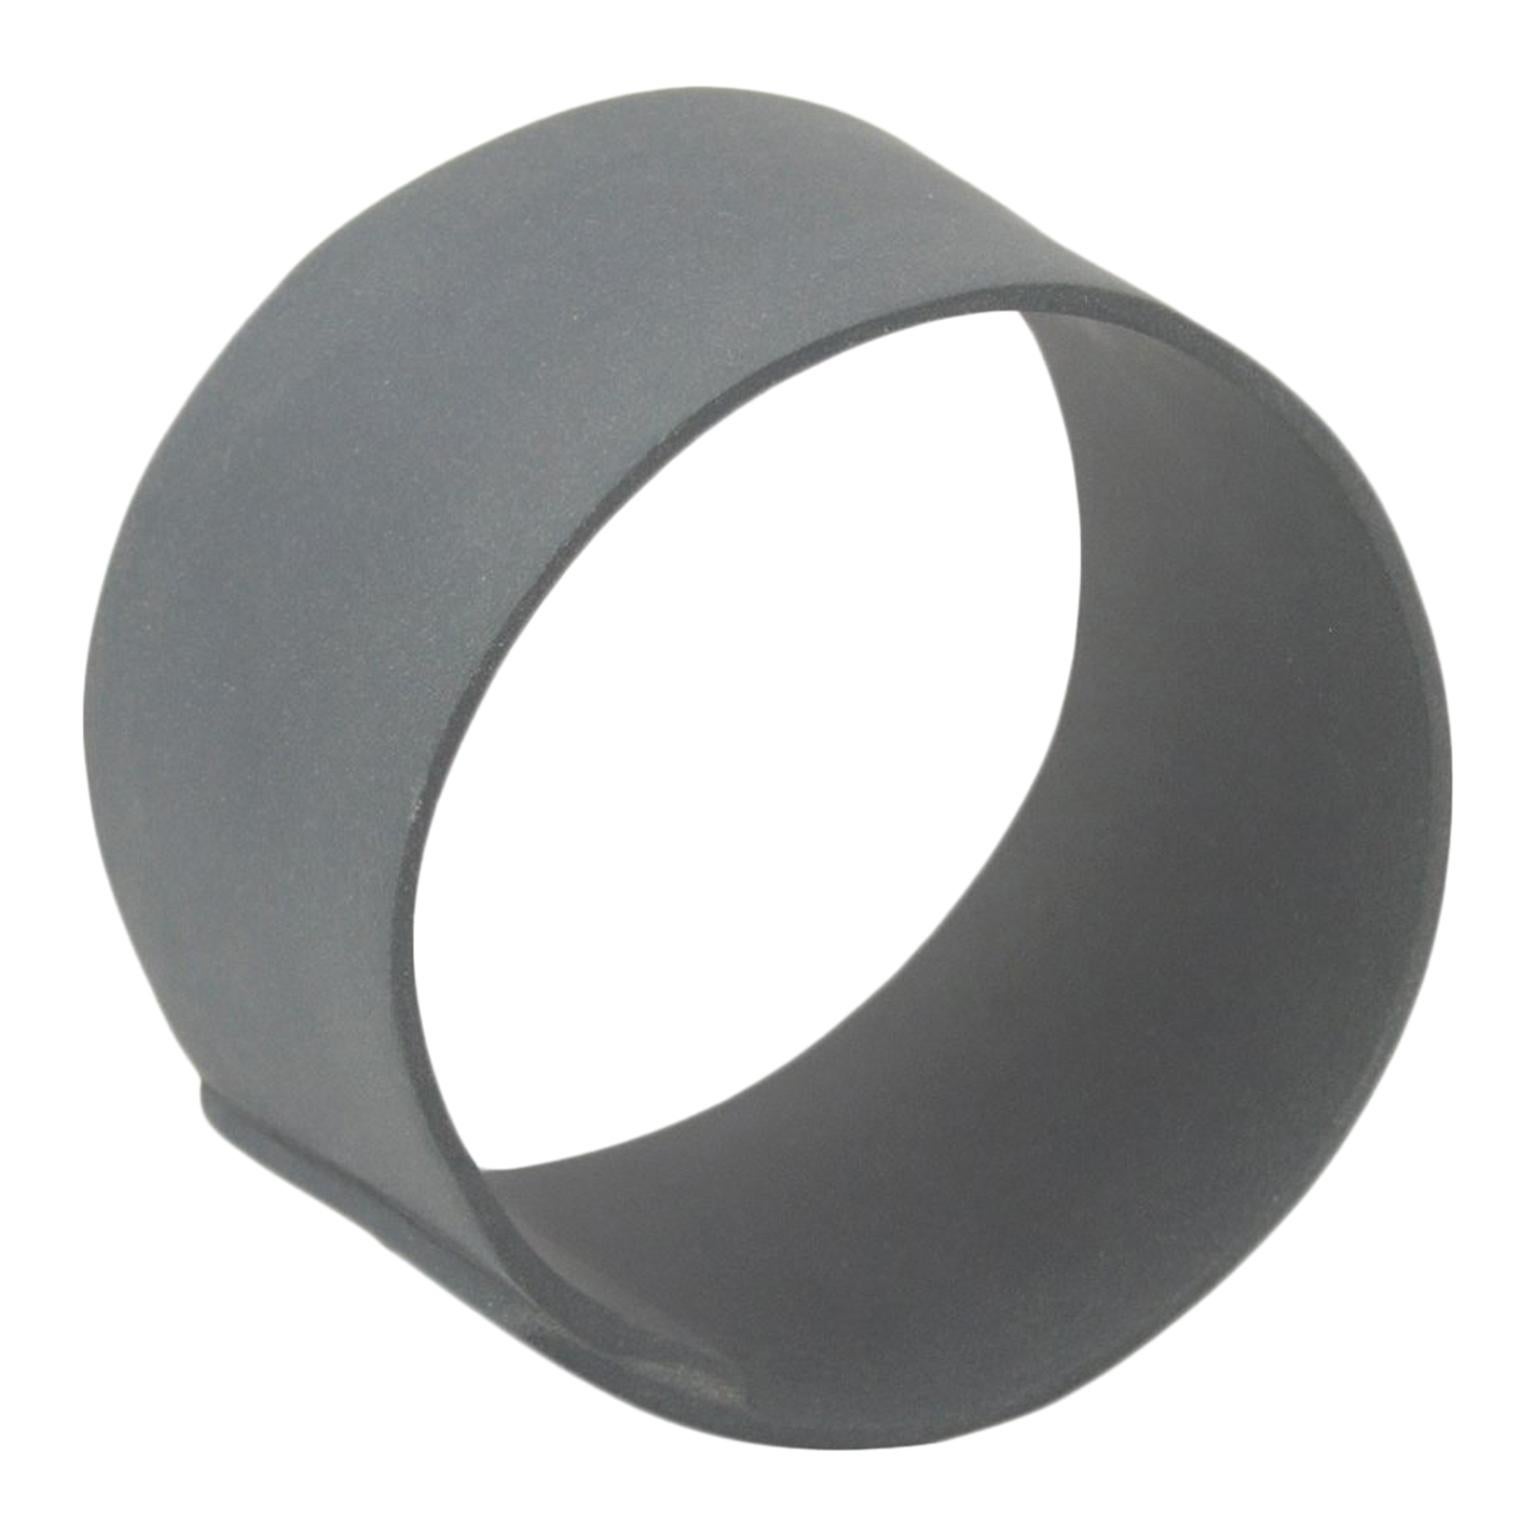 Handmade Contemporary Decorative Object Dark Grey Porcelain Ring For Sale